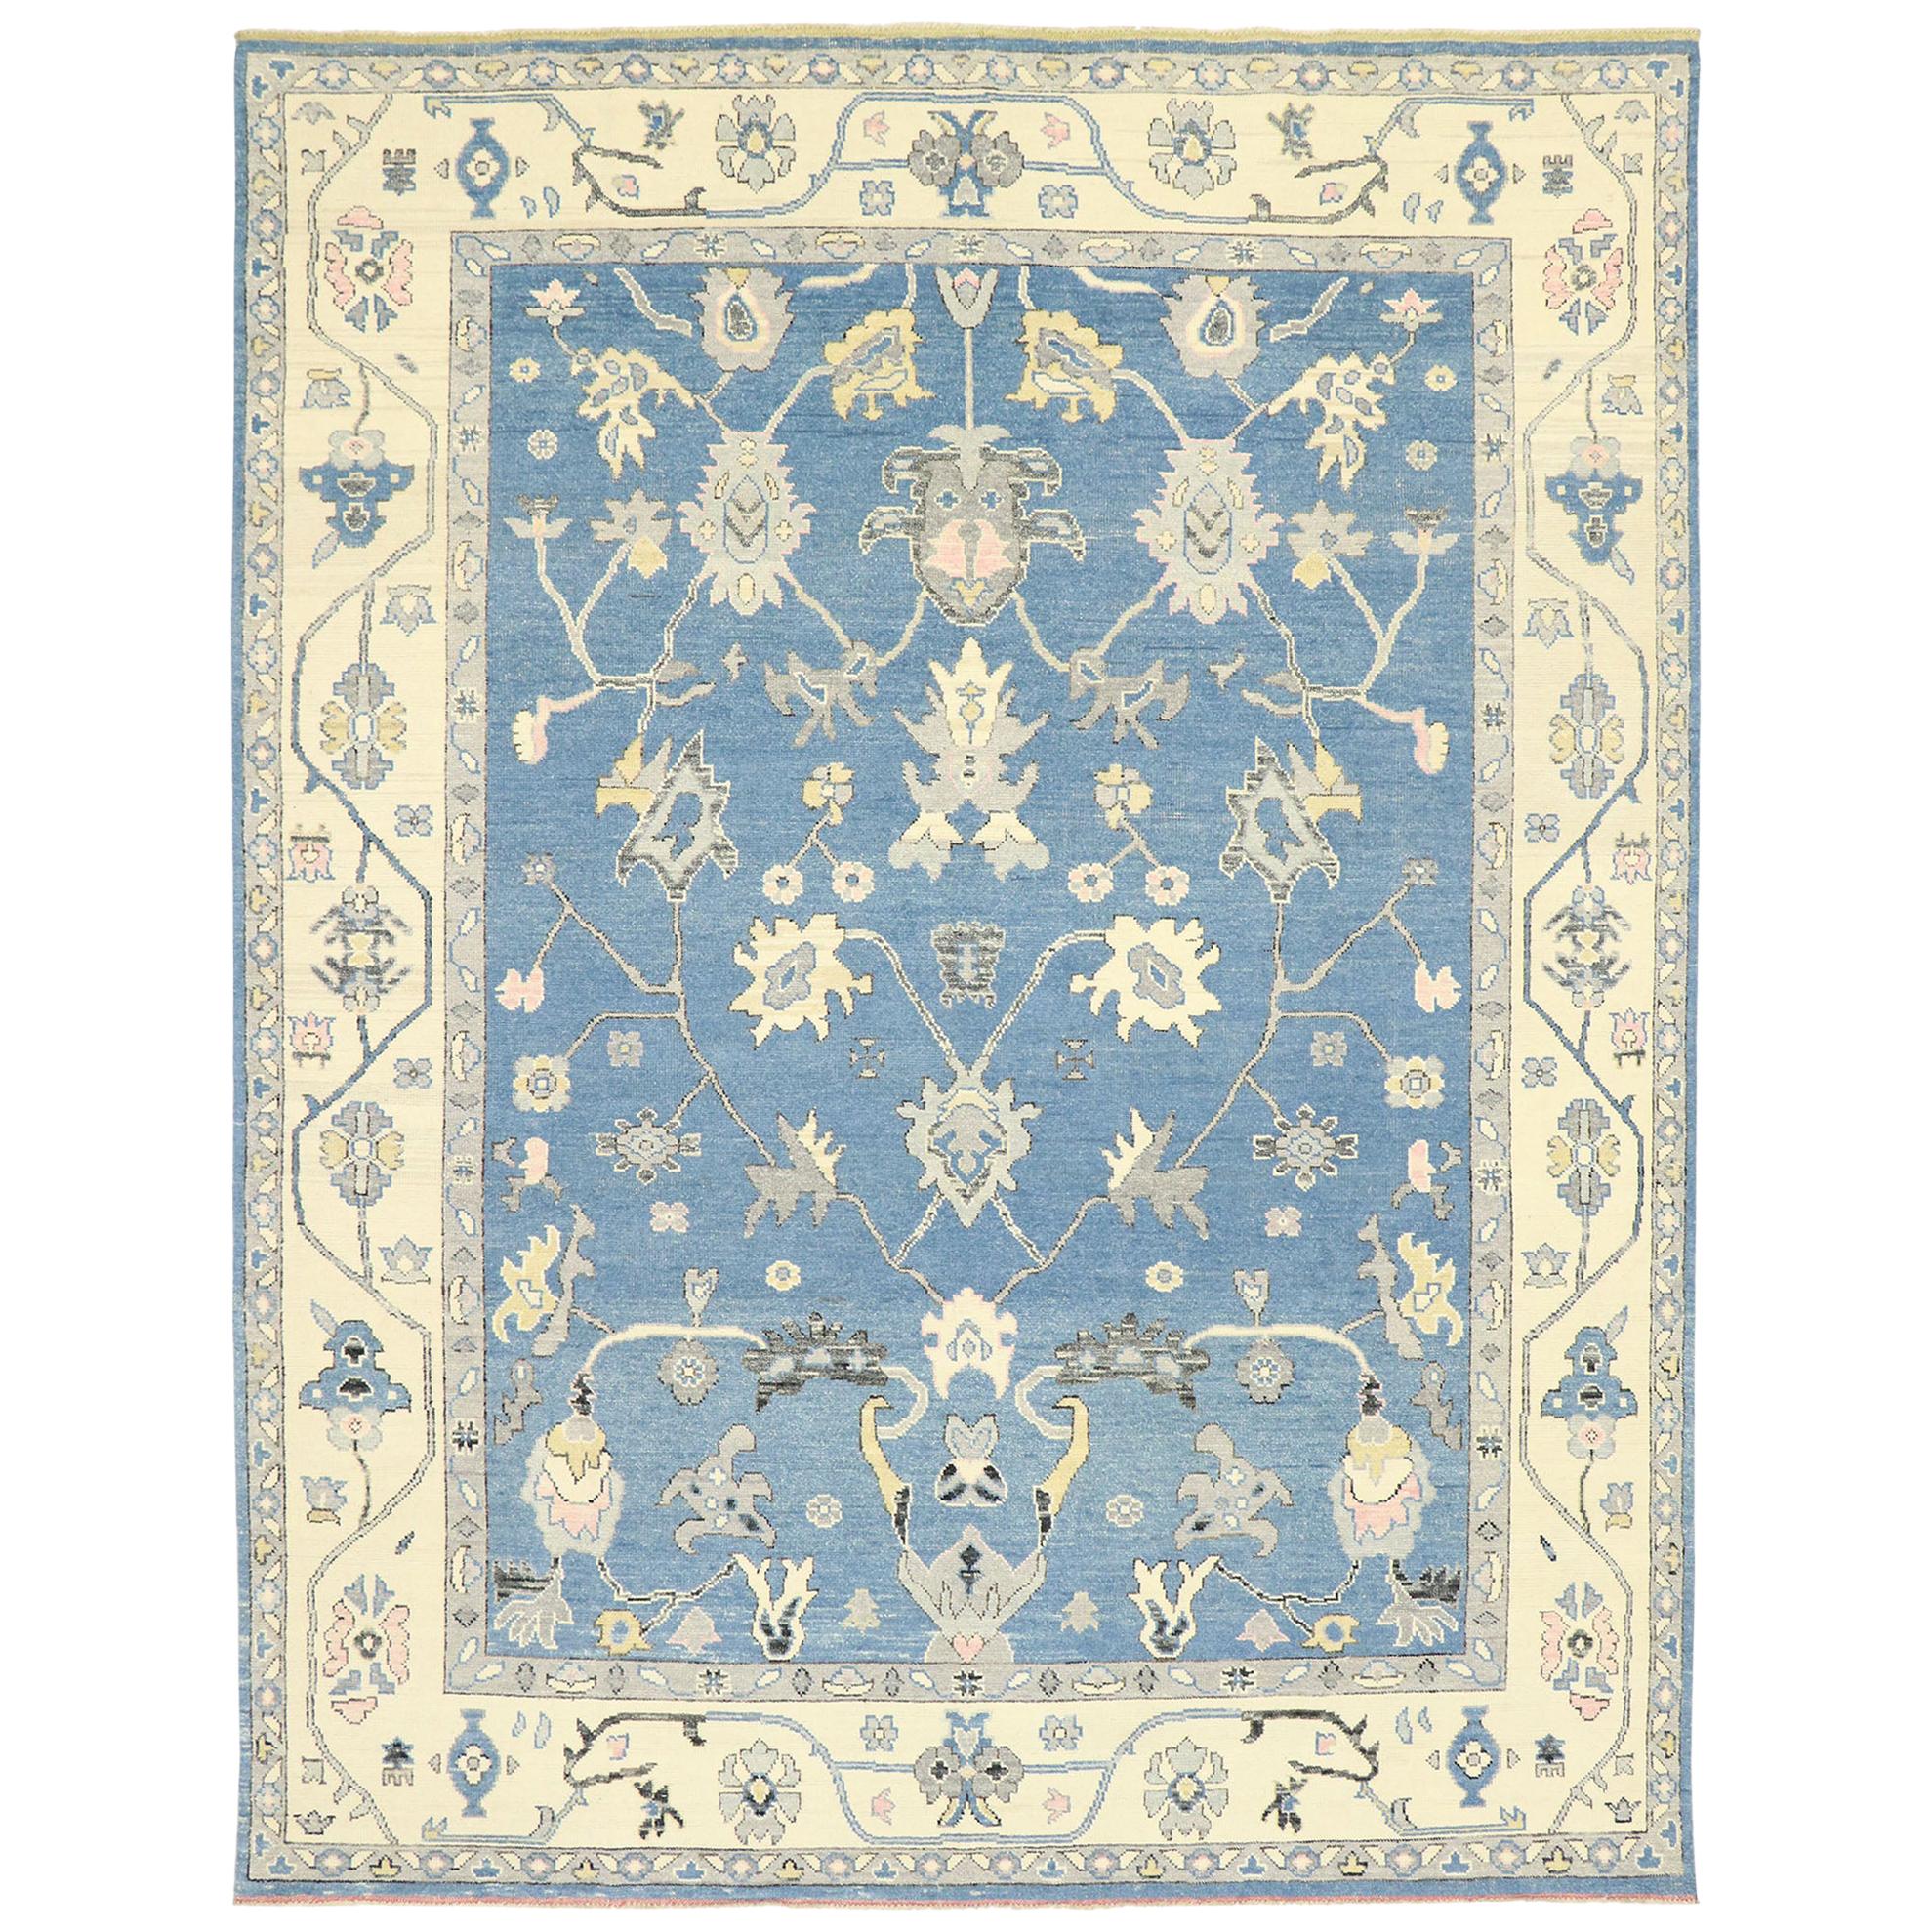 New Contemporary Colorful Blue Oushak Rug with Modern Transitional Style